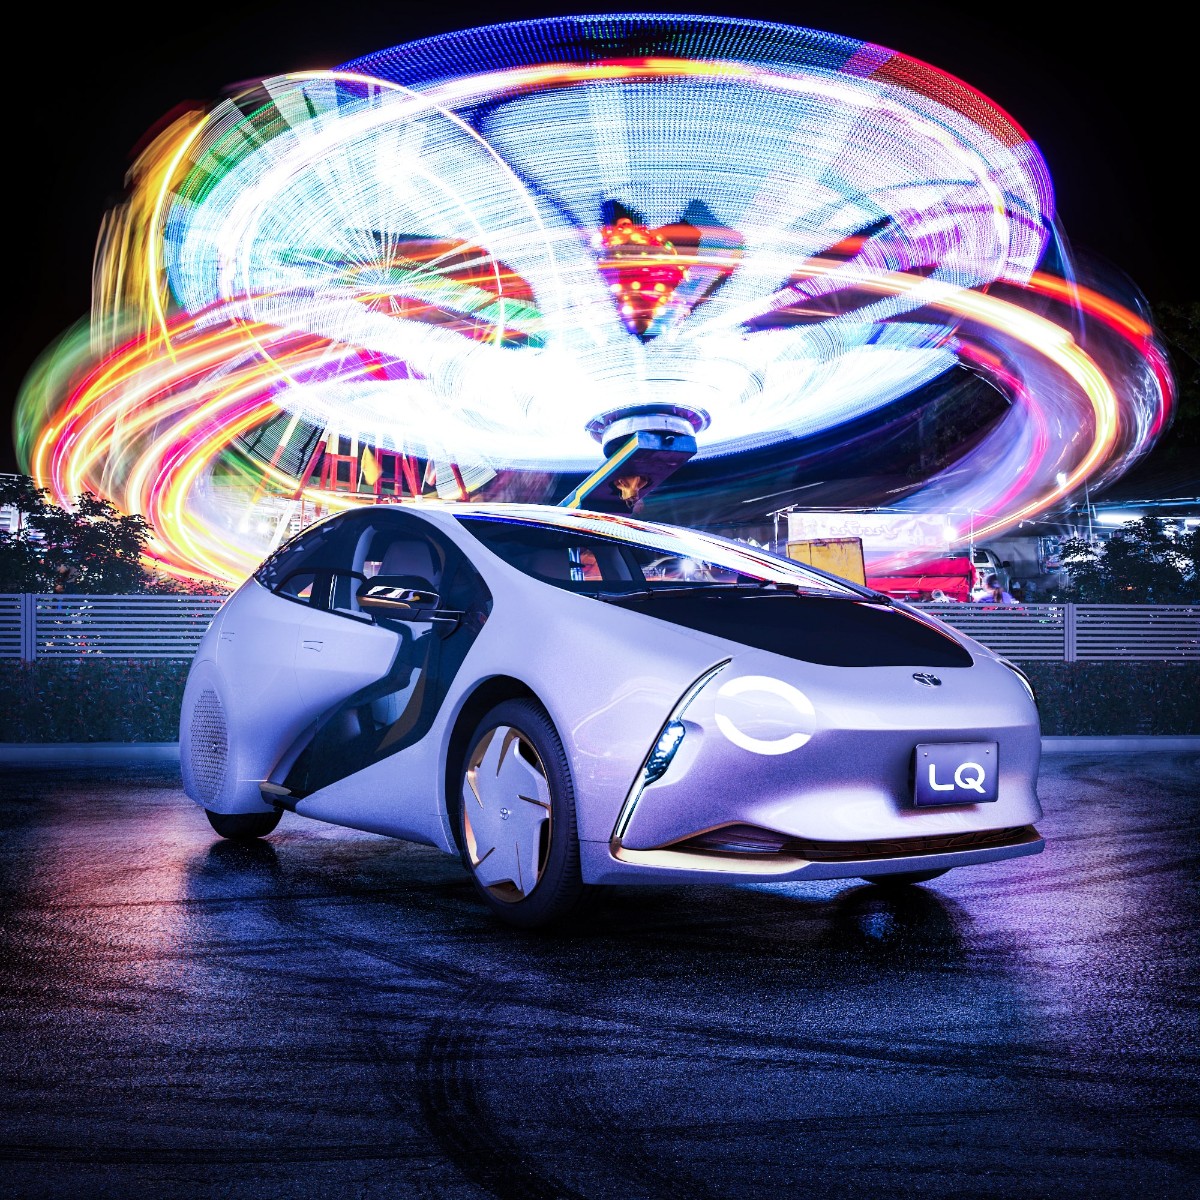 Shape the future your way.​

#Mobility #LQ #3D  #Toyota #ToyotaGlobal #bold #dynamic #cars #carsofthefuture #automotive #instacars #instacar #carstagram #supercar #speed #road  #drive  #fast   #transport #driving #wheels #mechanic #automobile #driver